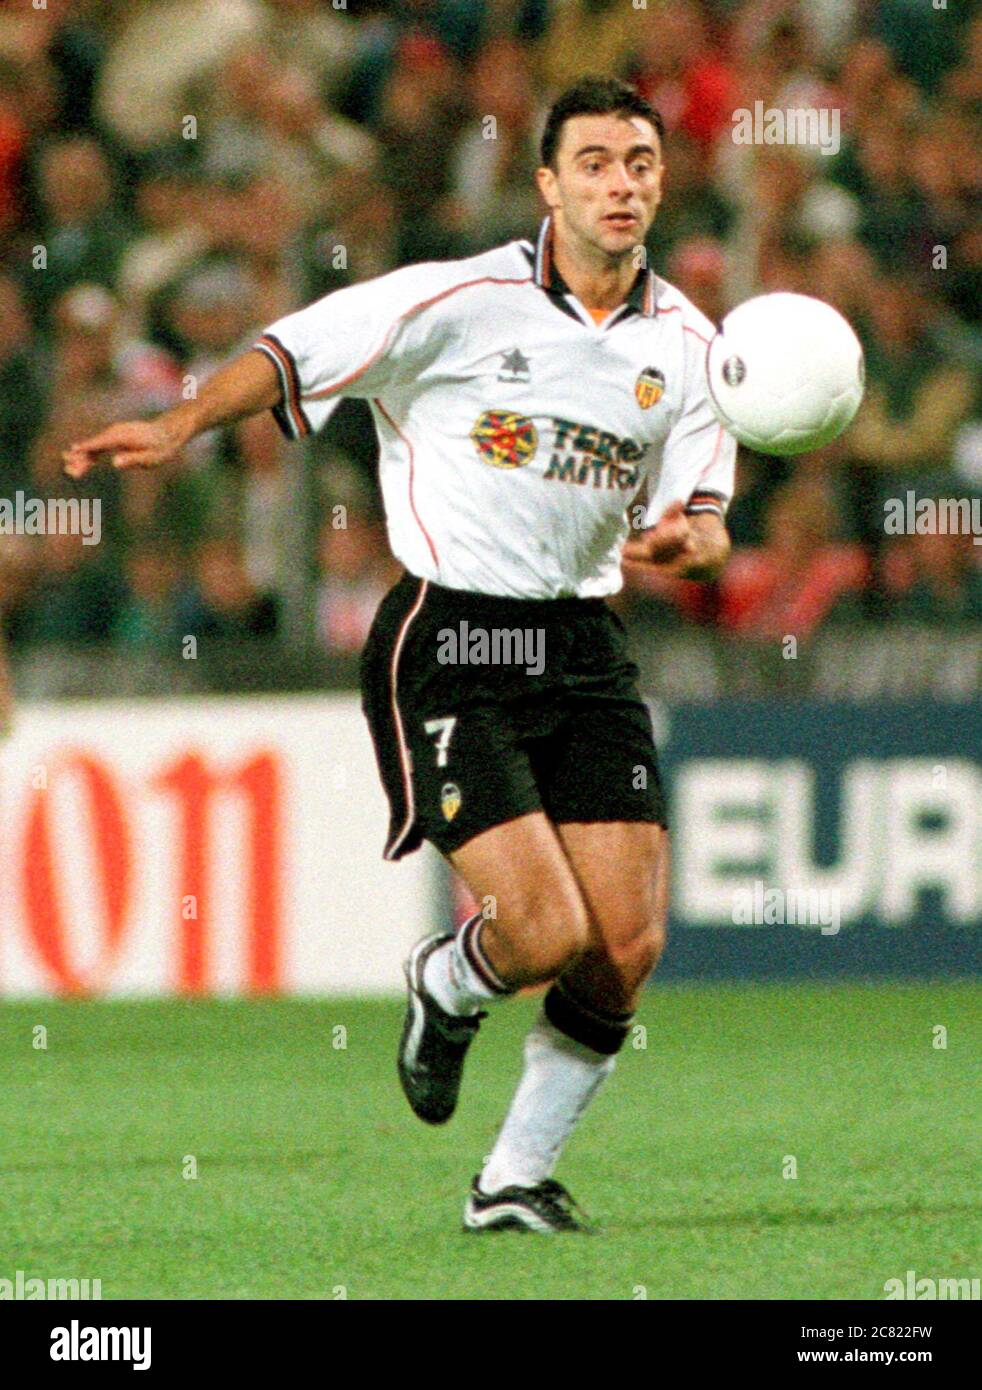 Philips Stadium Eindhoven Netherlands 21.9.1999, Football: Champions League season 1999/2000, matchday 2,  PSV Eindhoven (PSV, red) vs FC Valencia (VAL, white) 1:1 - Claudio LOPEZ (VAL) Stock Photo